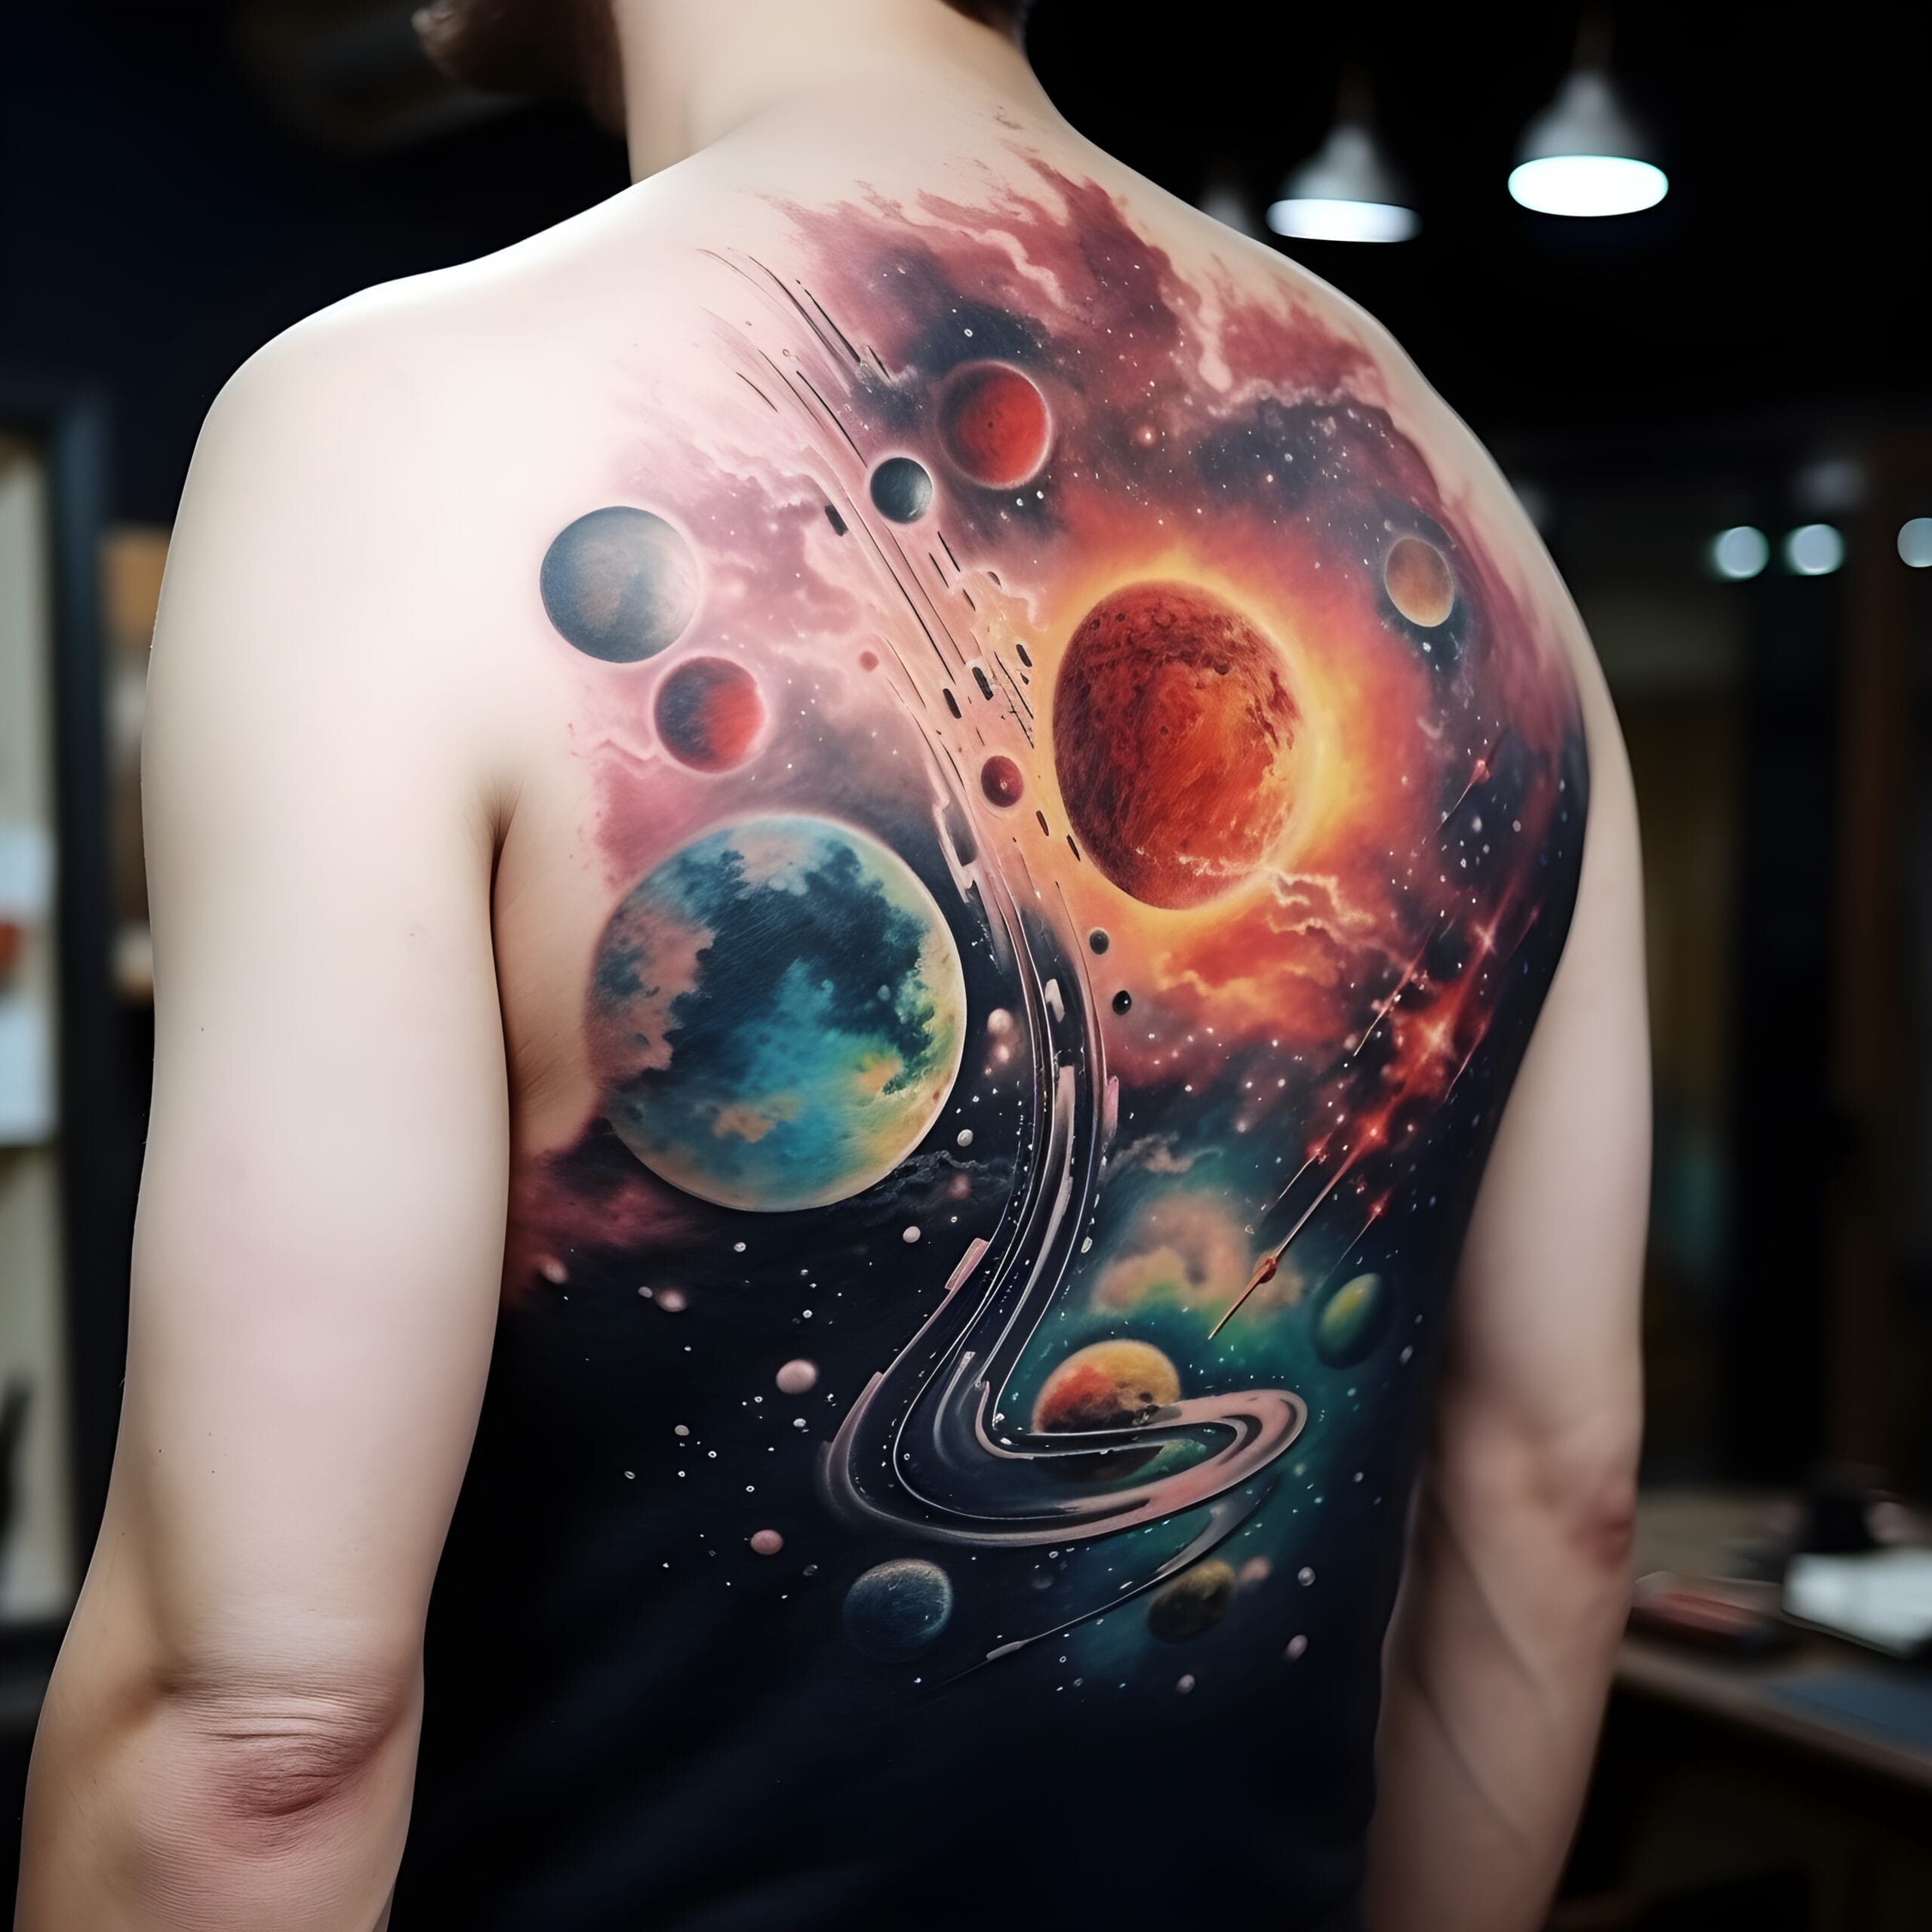 A man with a tattoo of planets on his back feels at home.